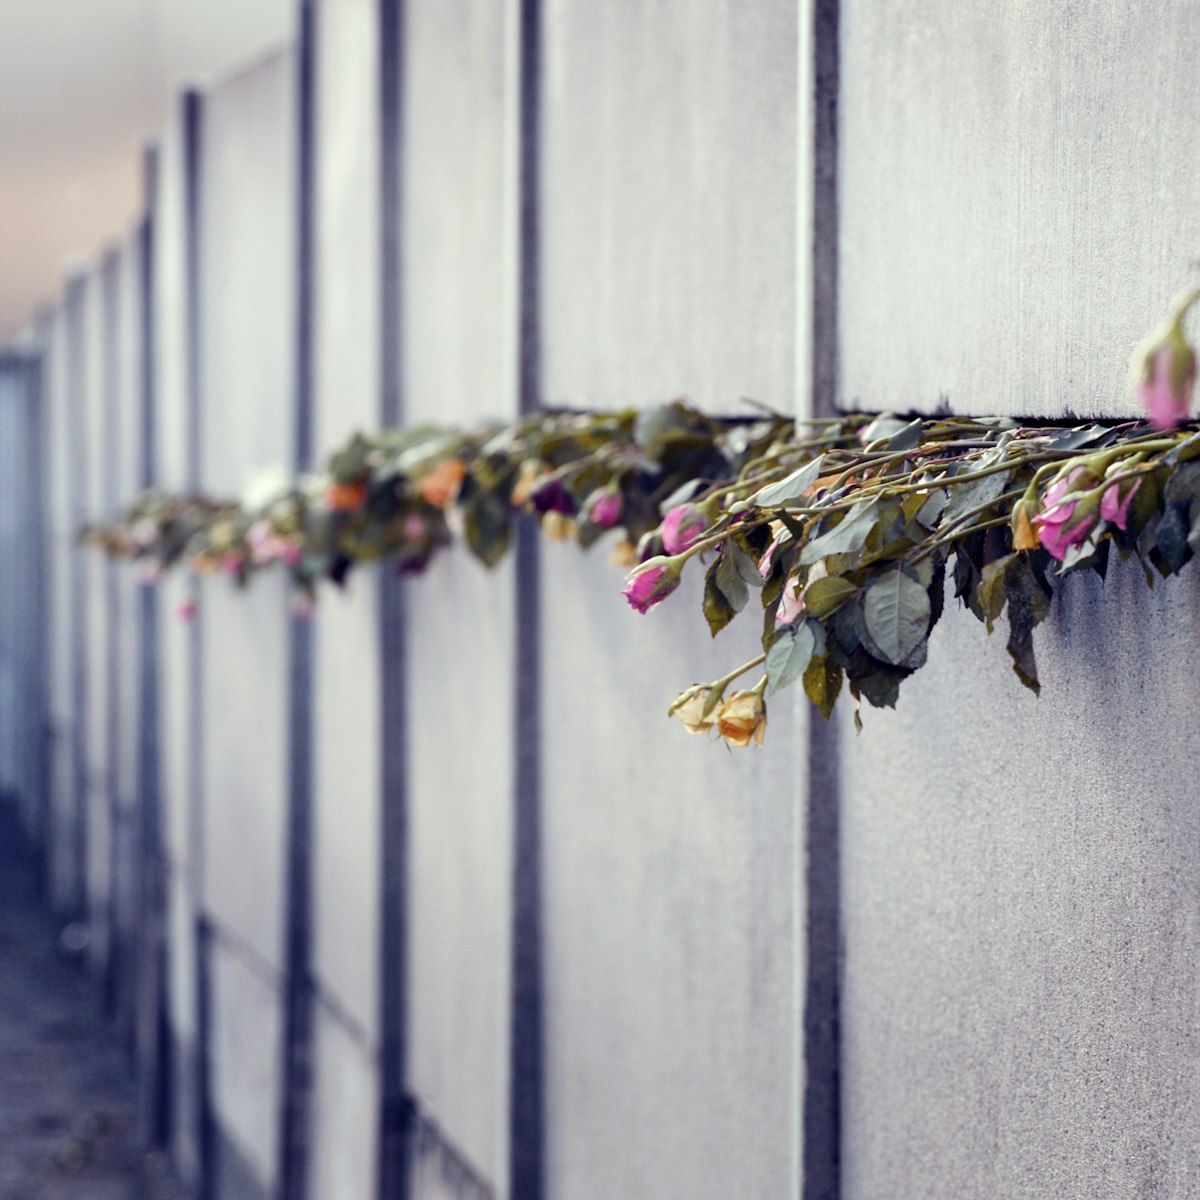 Roses protruding from the Berlin Wall